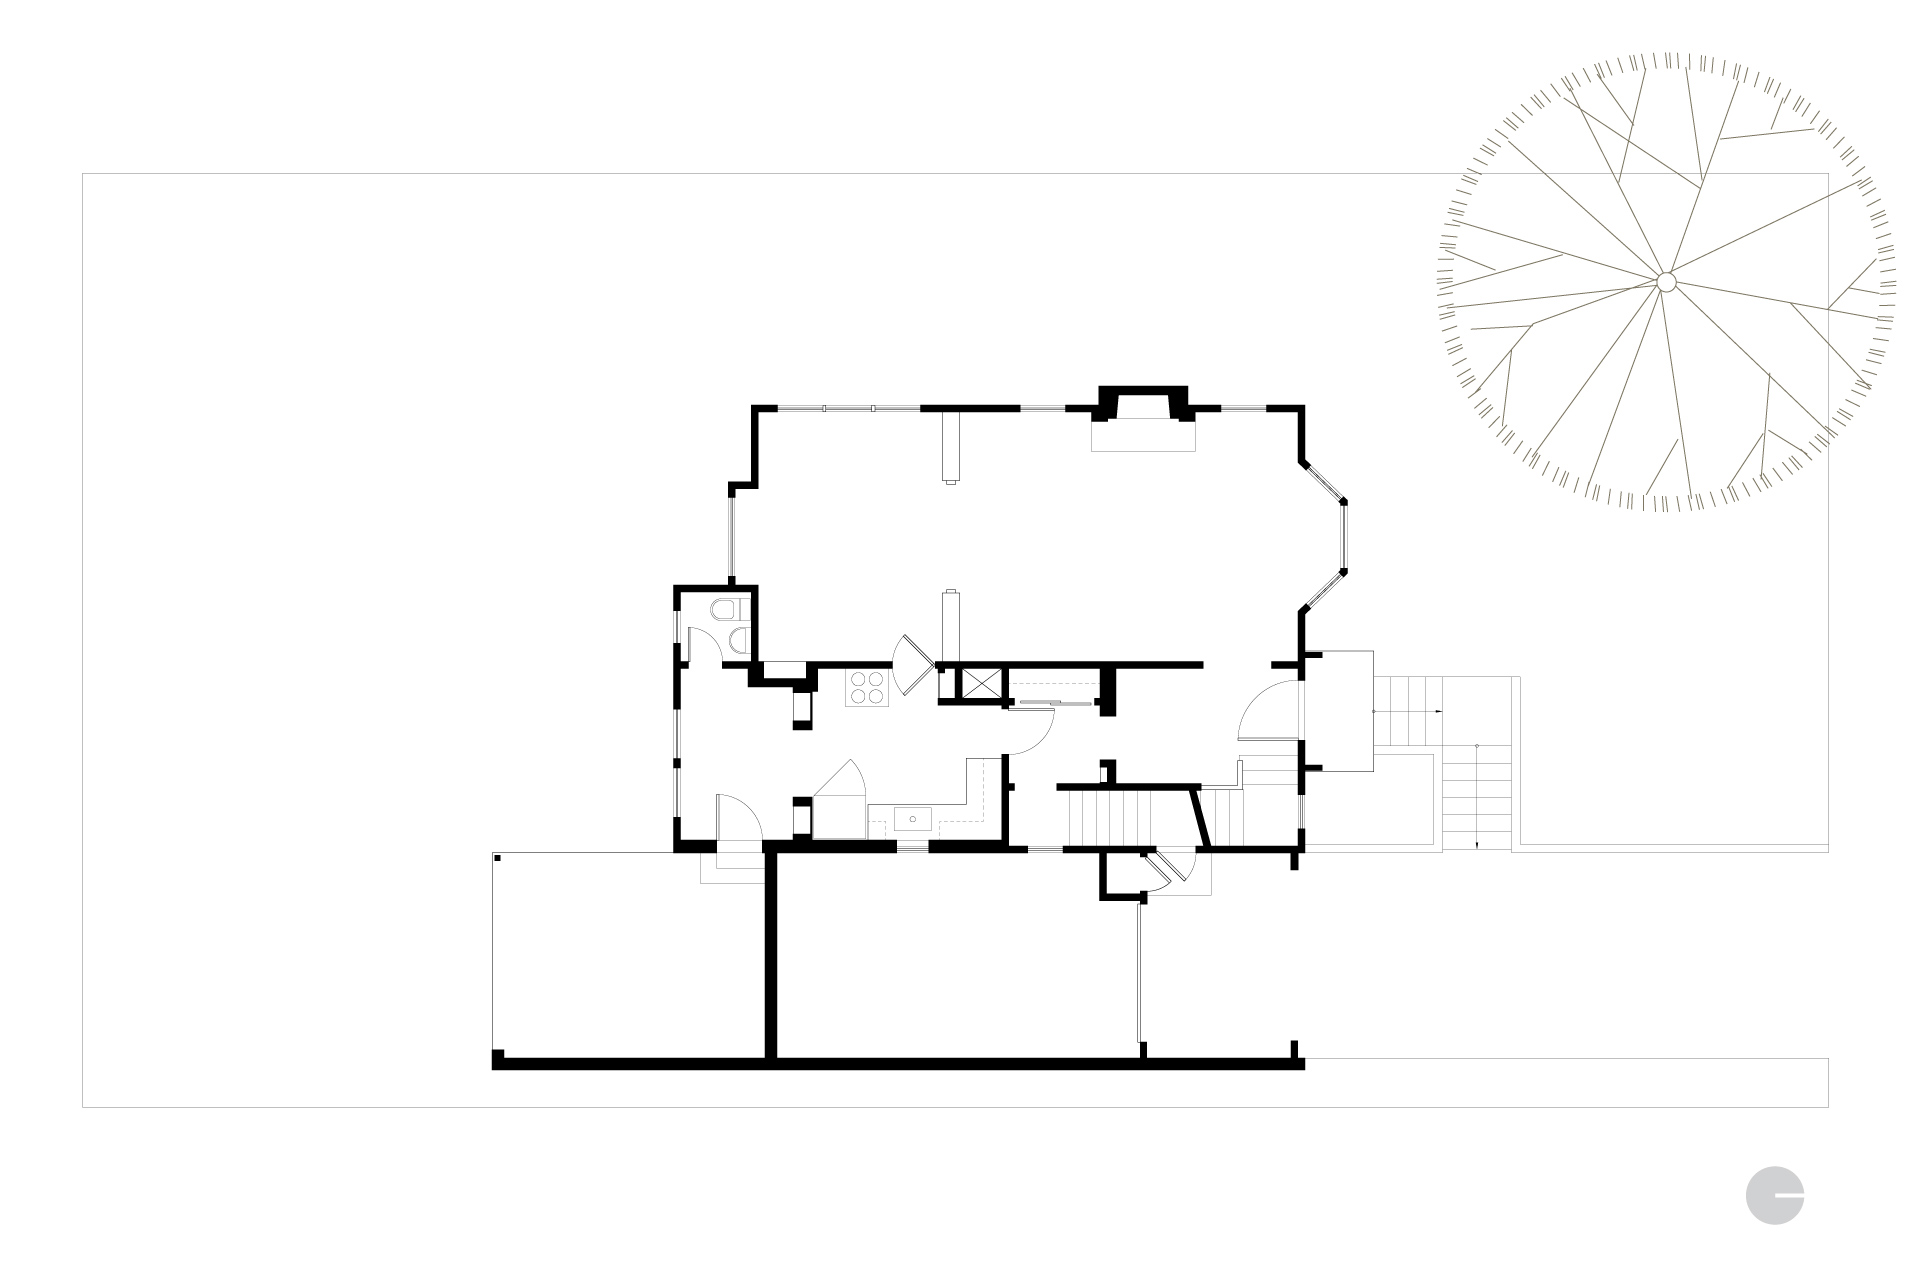 This is a floor plan drawing of the Laurelhurst Craftsman before being renovated.